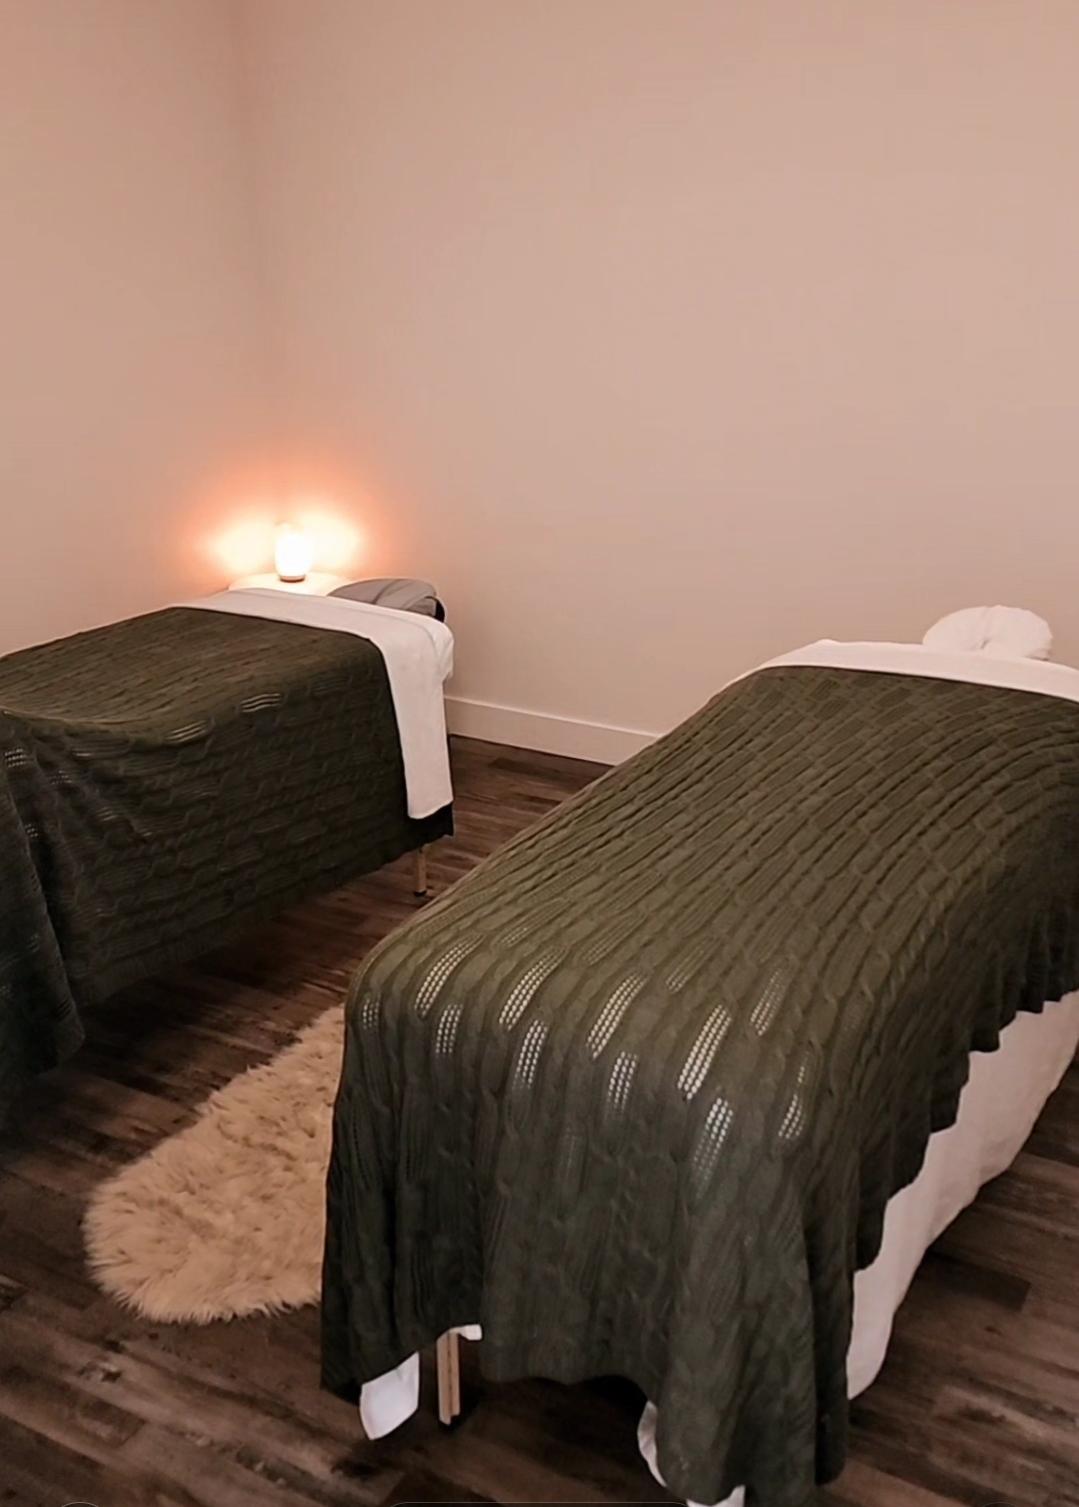 Lindon's Healing Haven
Discover Lindon's healing sanctuary at Seasons Salon and Day Spa. Rejuvenate your mind and body.